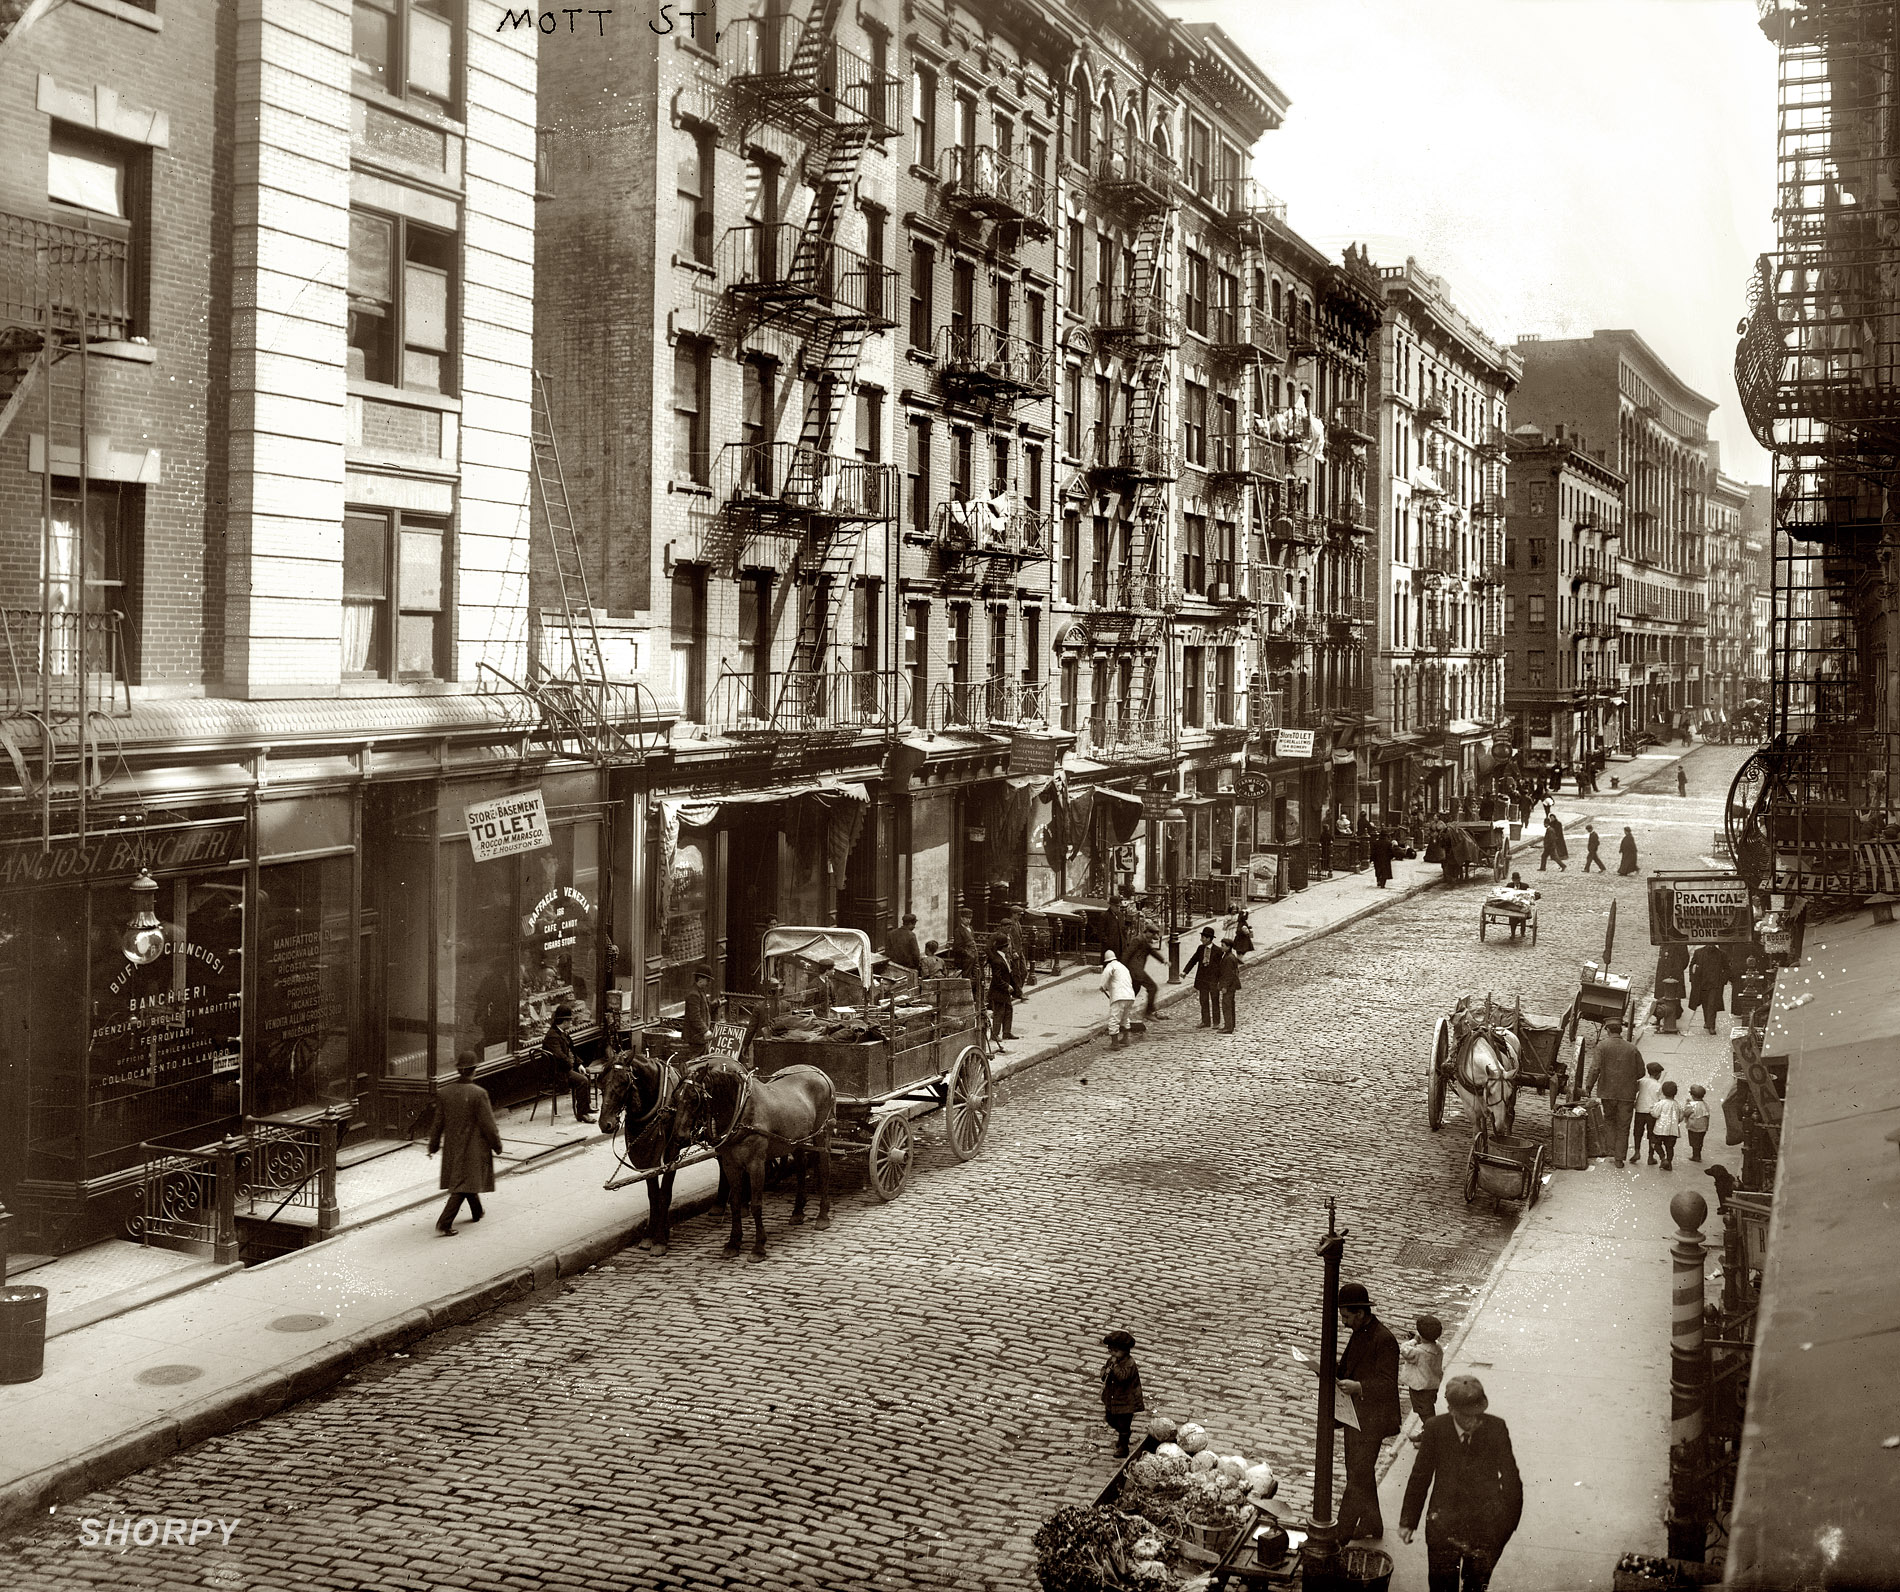 1910. Mott Street in New York's Little Italy, now Chinatown.  At the left, 166 Mott (Raffaele Venezia Cafe) is now Face to Face Skin Care. Google Street View. 8x10 glass negative, George Grantham Bain Collection. View full size.